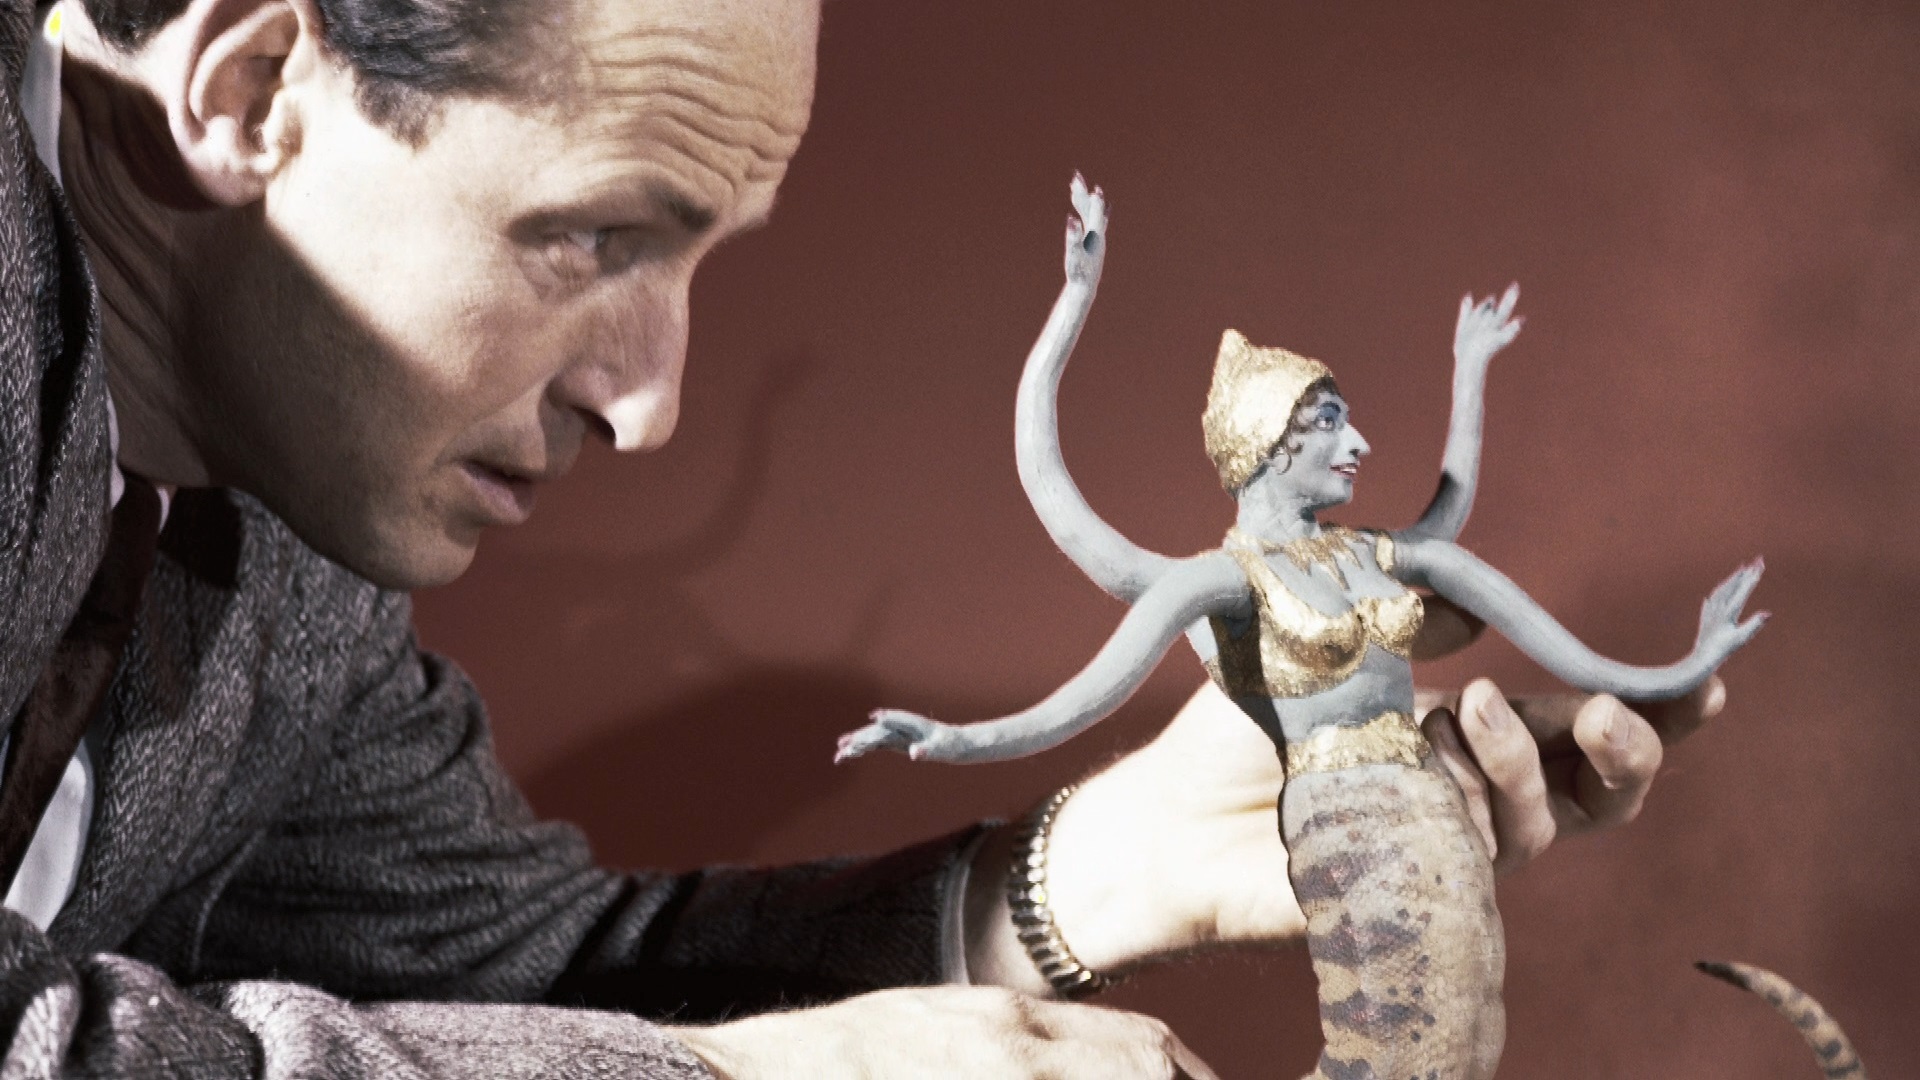 Ray Harryhausen: Special Effects Titan (Blu-ray) : DVD Talk Review of the Blu-ray